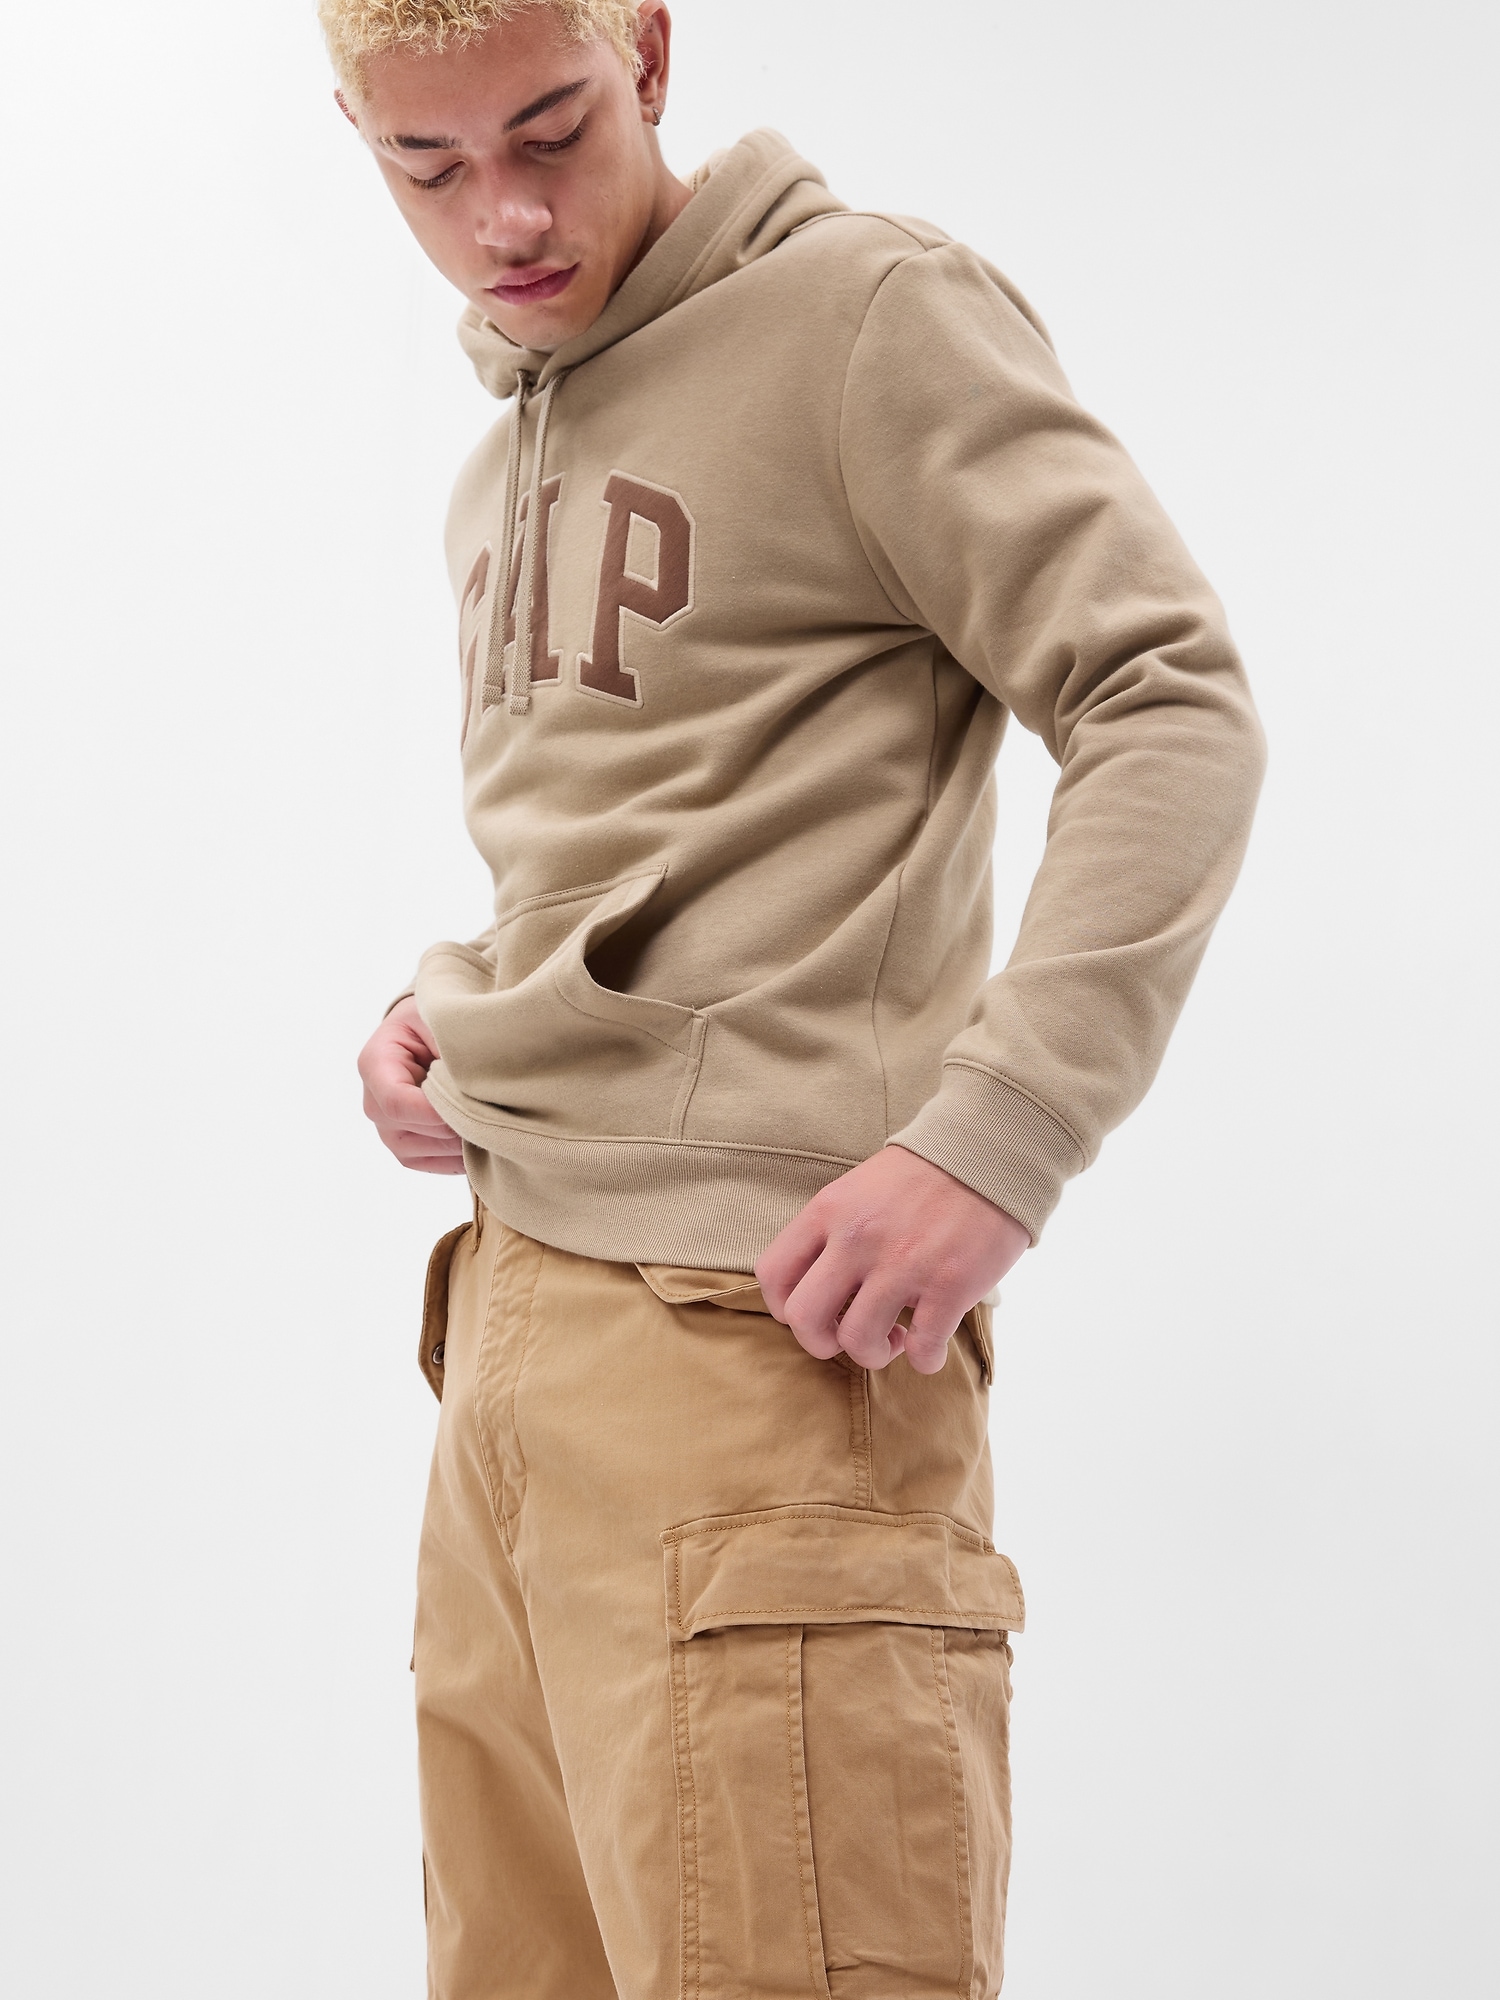 Relaxed Utility Cargo Pants | Gap